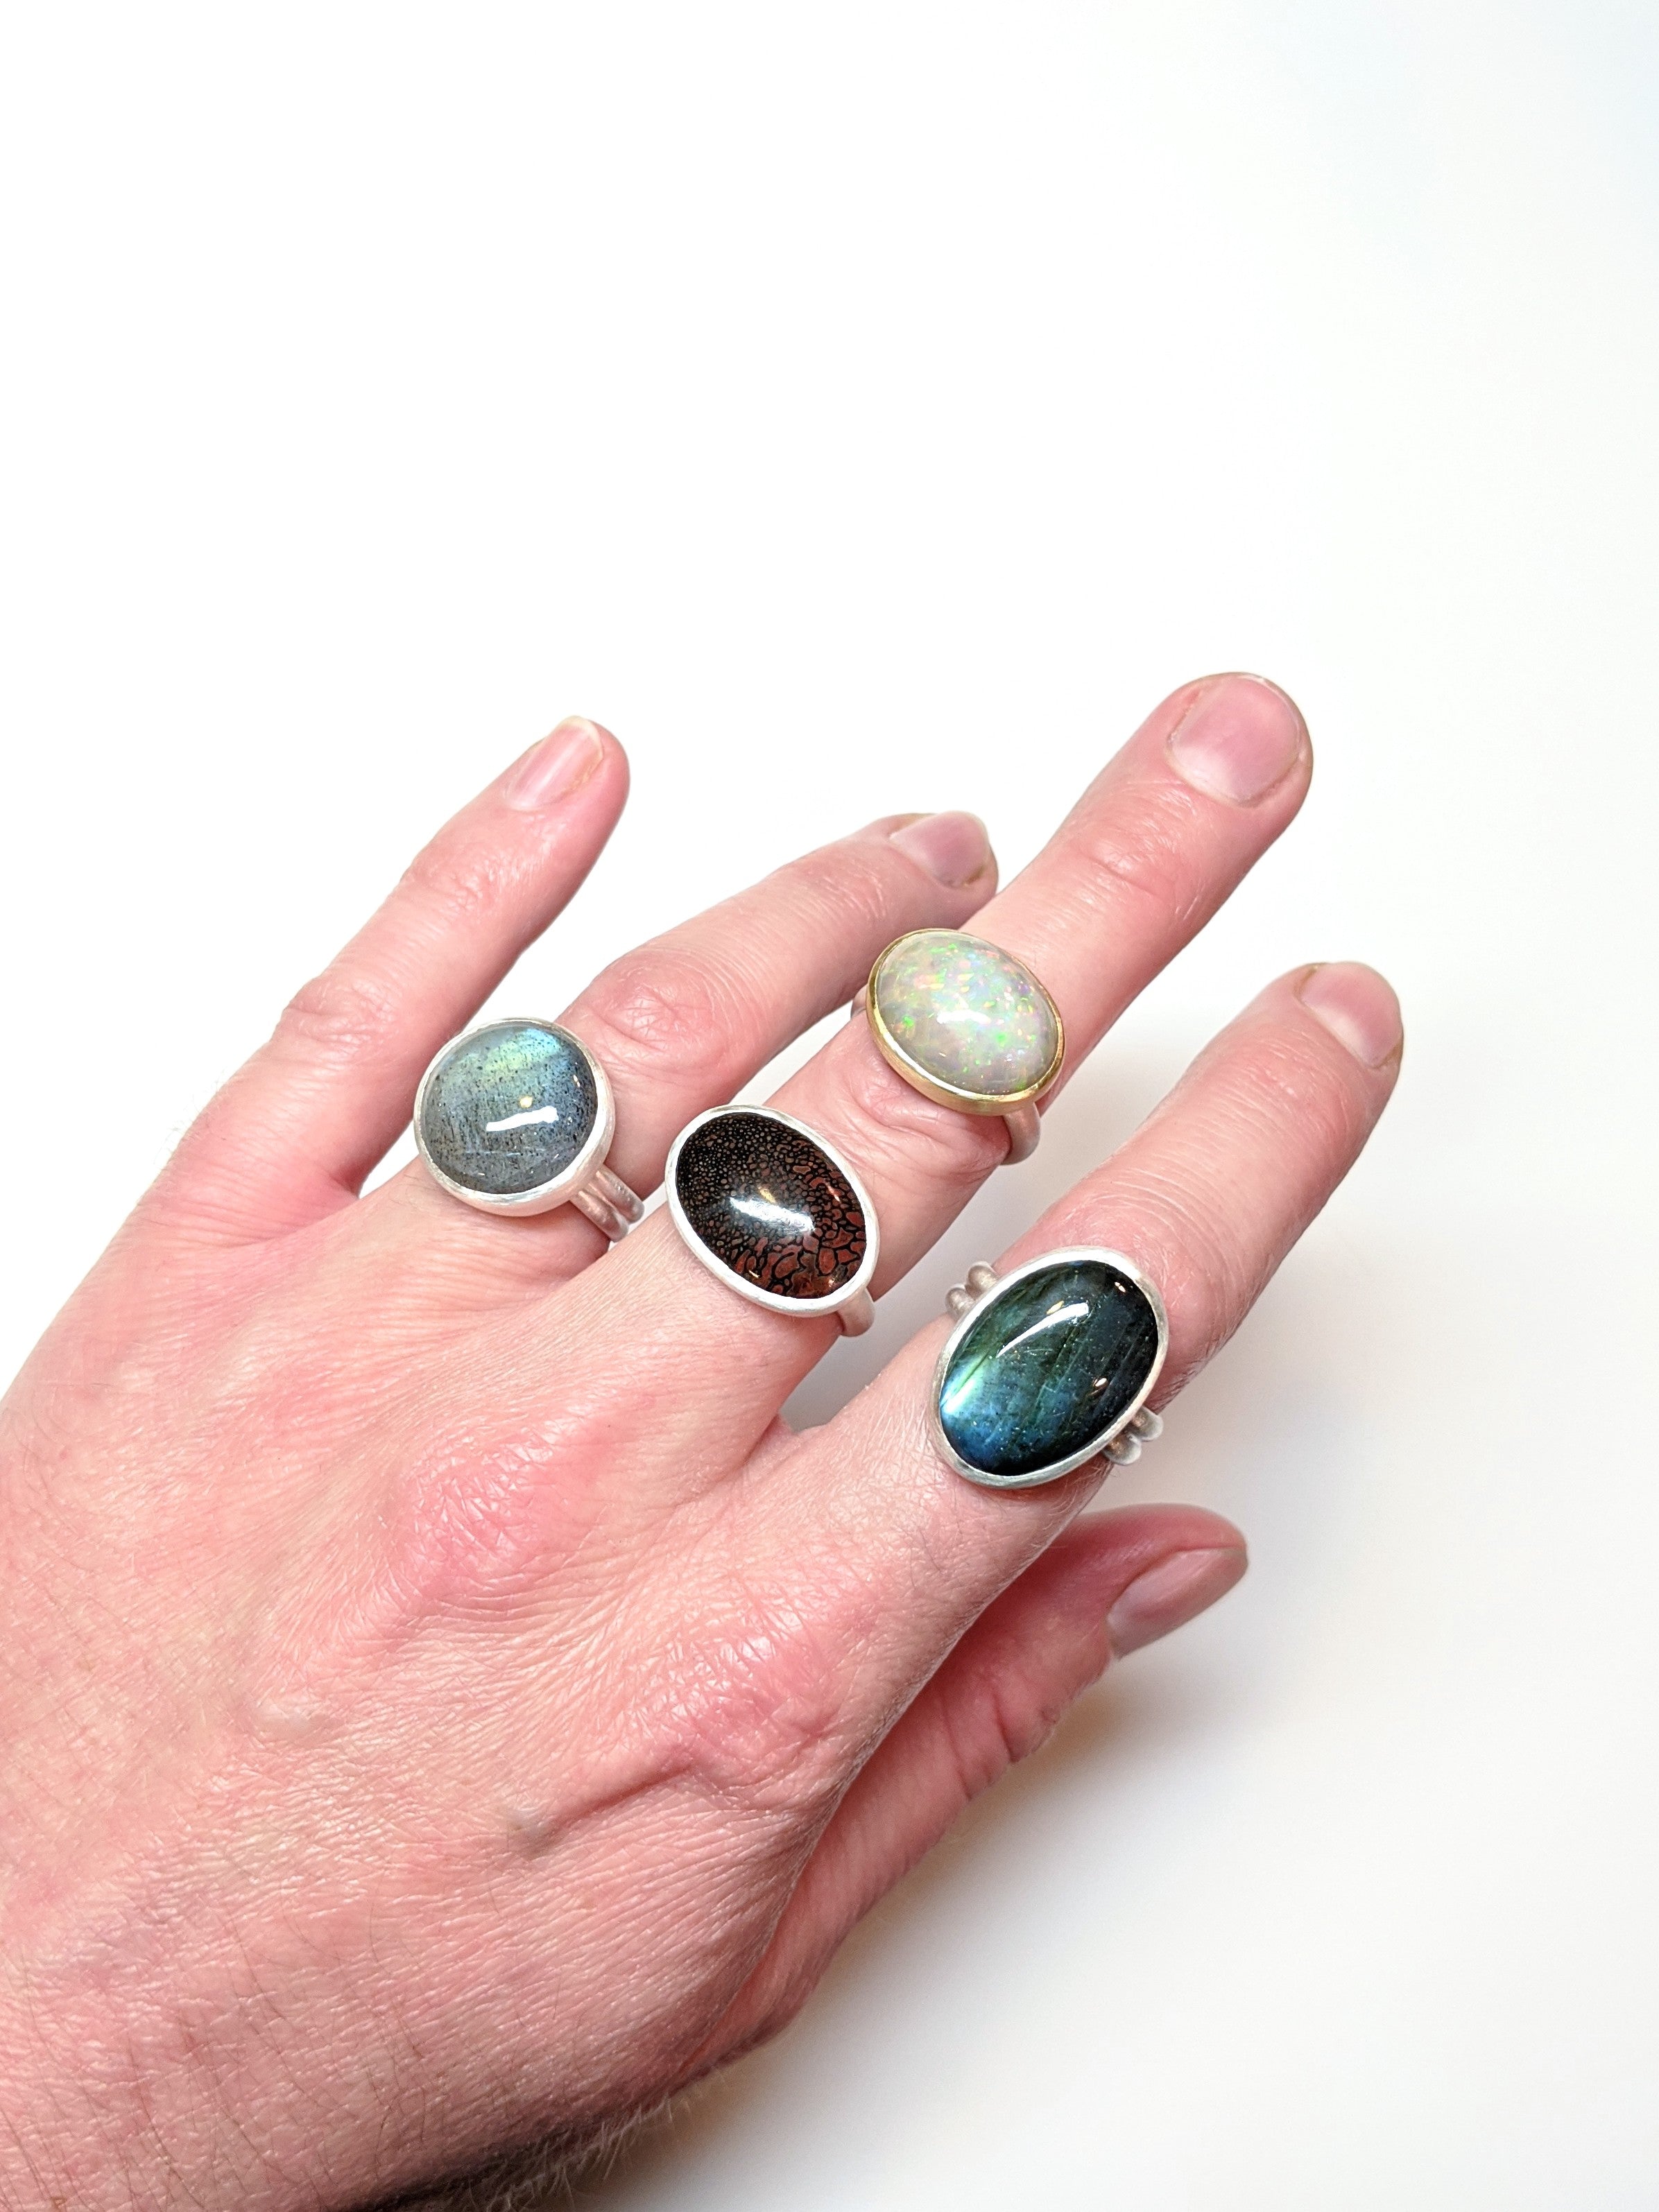 Oval Labradorite Double Band Ring - Size 7.75